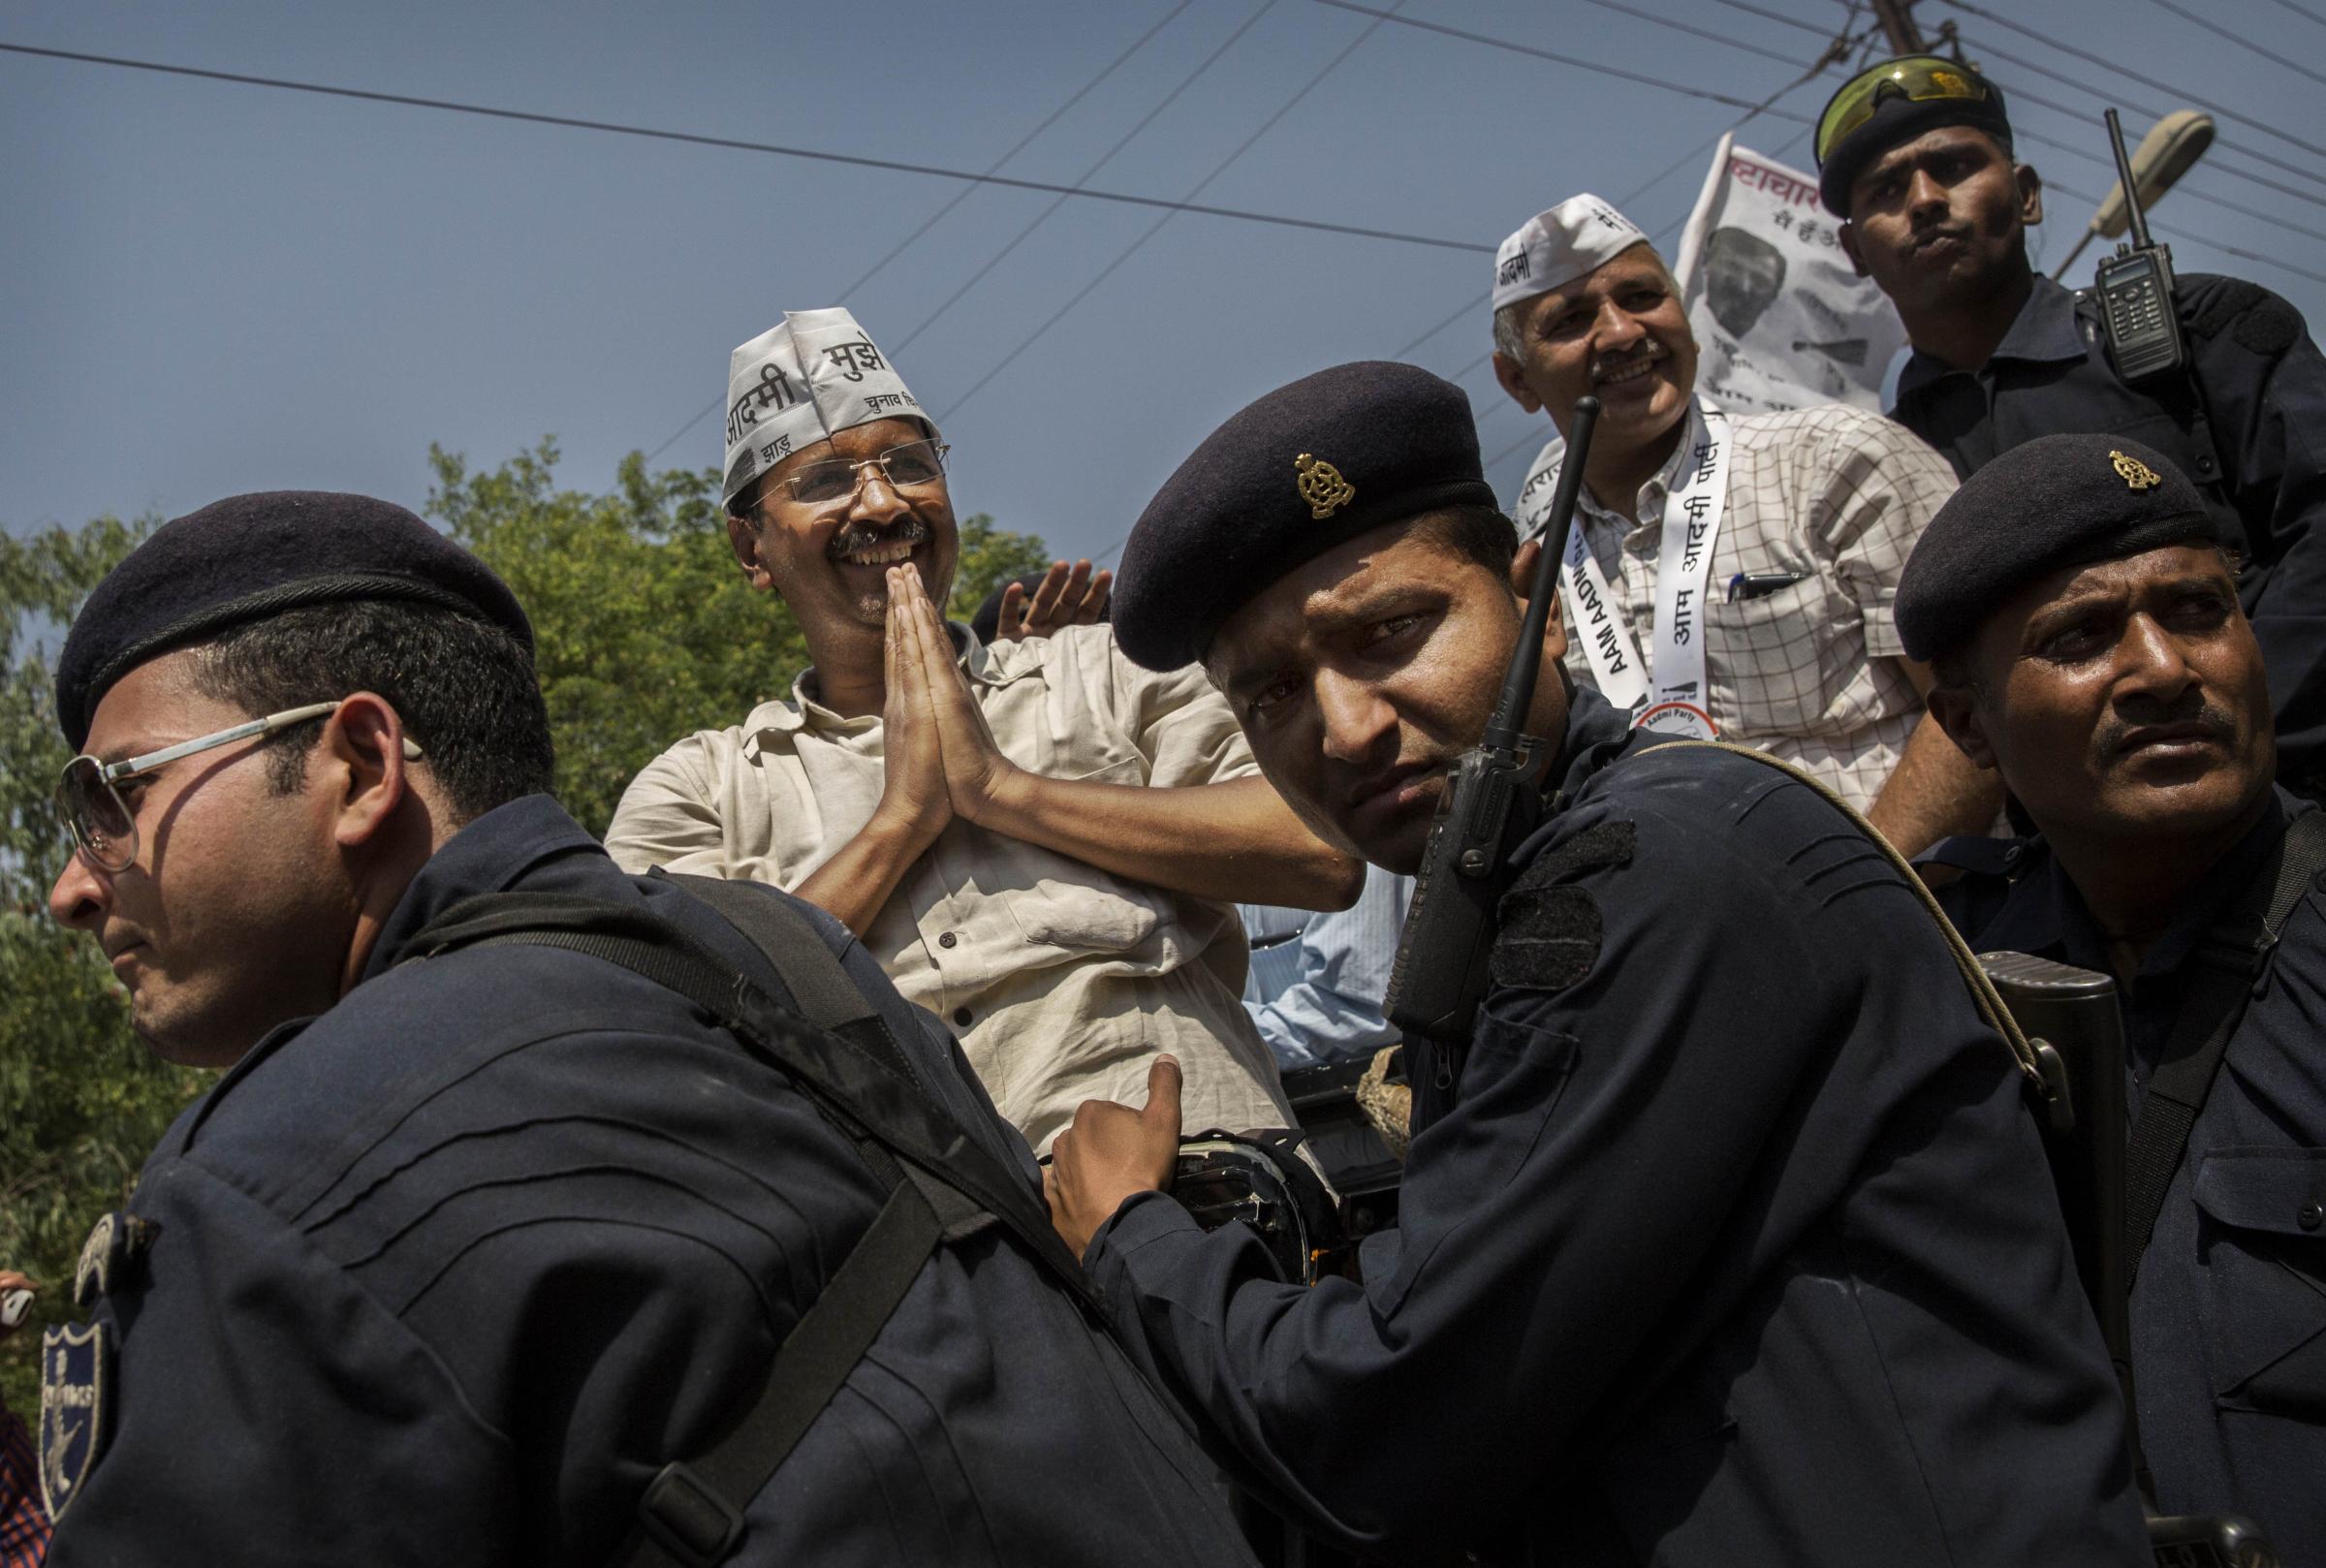 AAP leader and anti-corruption activist Arvin Kejriwal is surrounded by police bodyguards as he greets supporters from an open jeep on his way to file his nomination papers on April 23, 2014 in Varanasi.